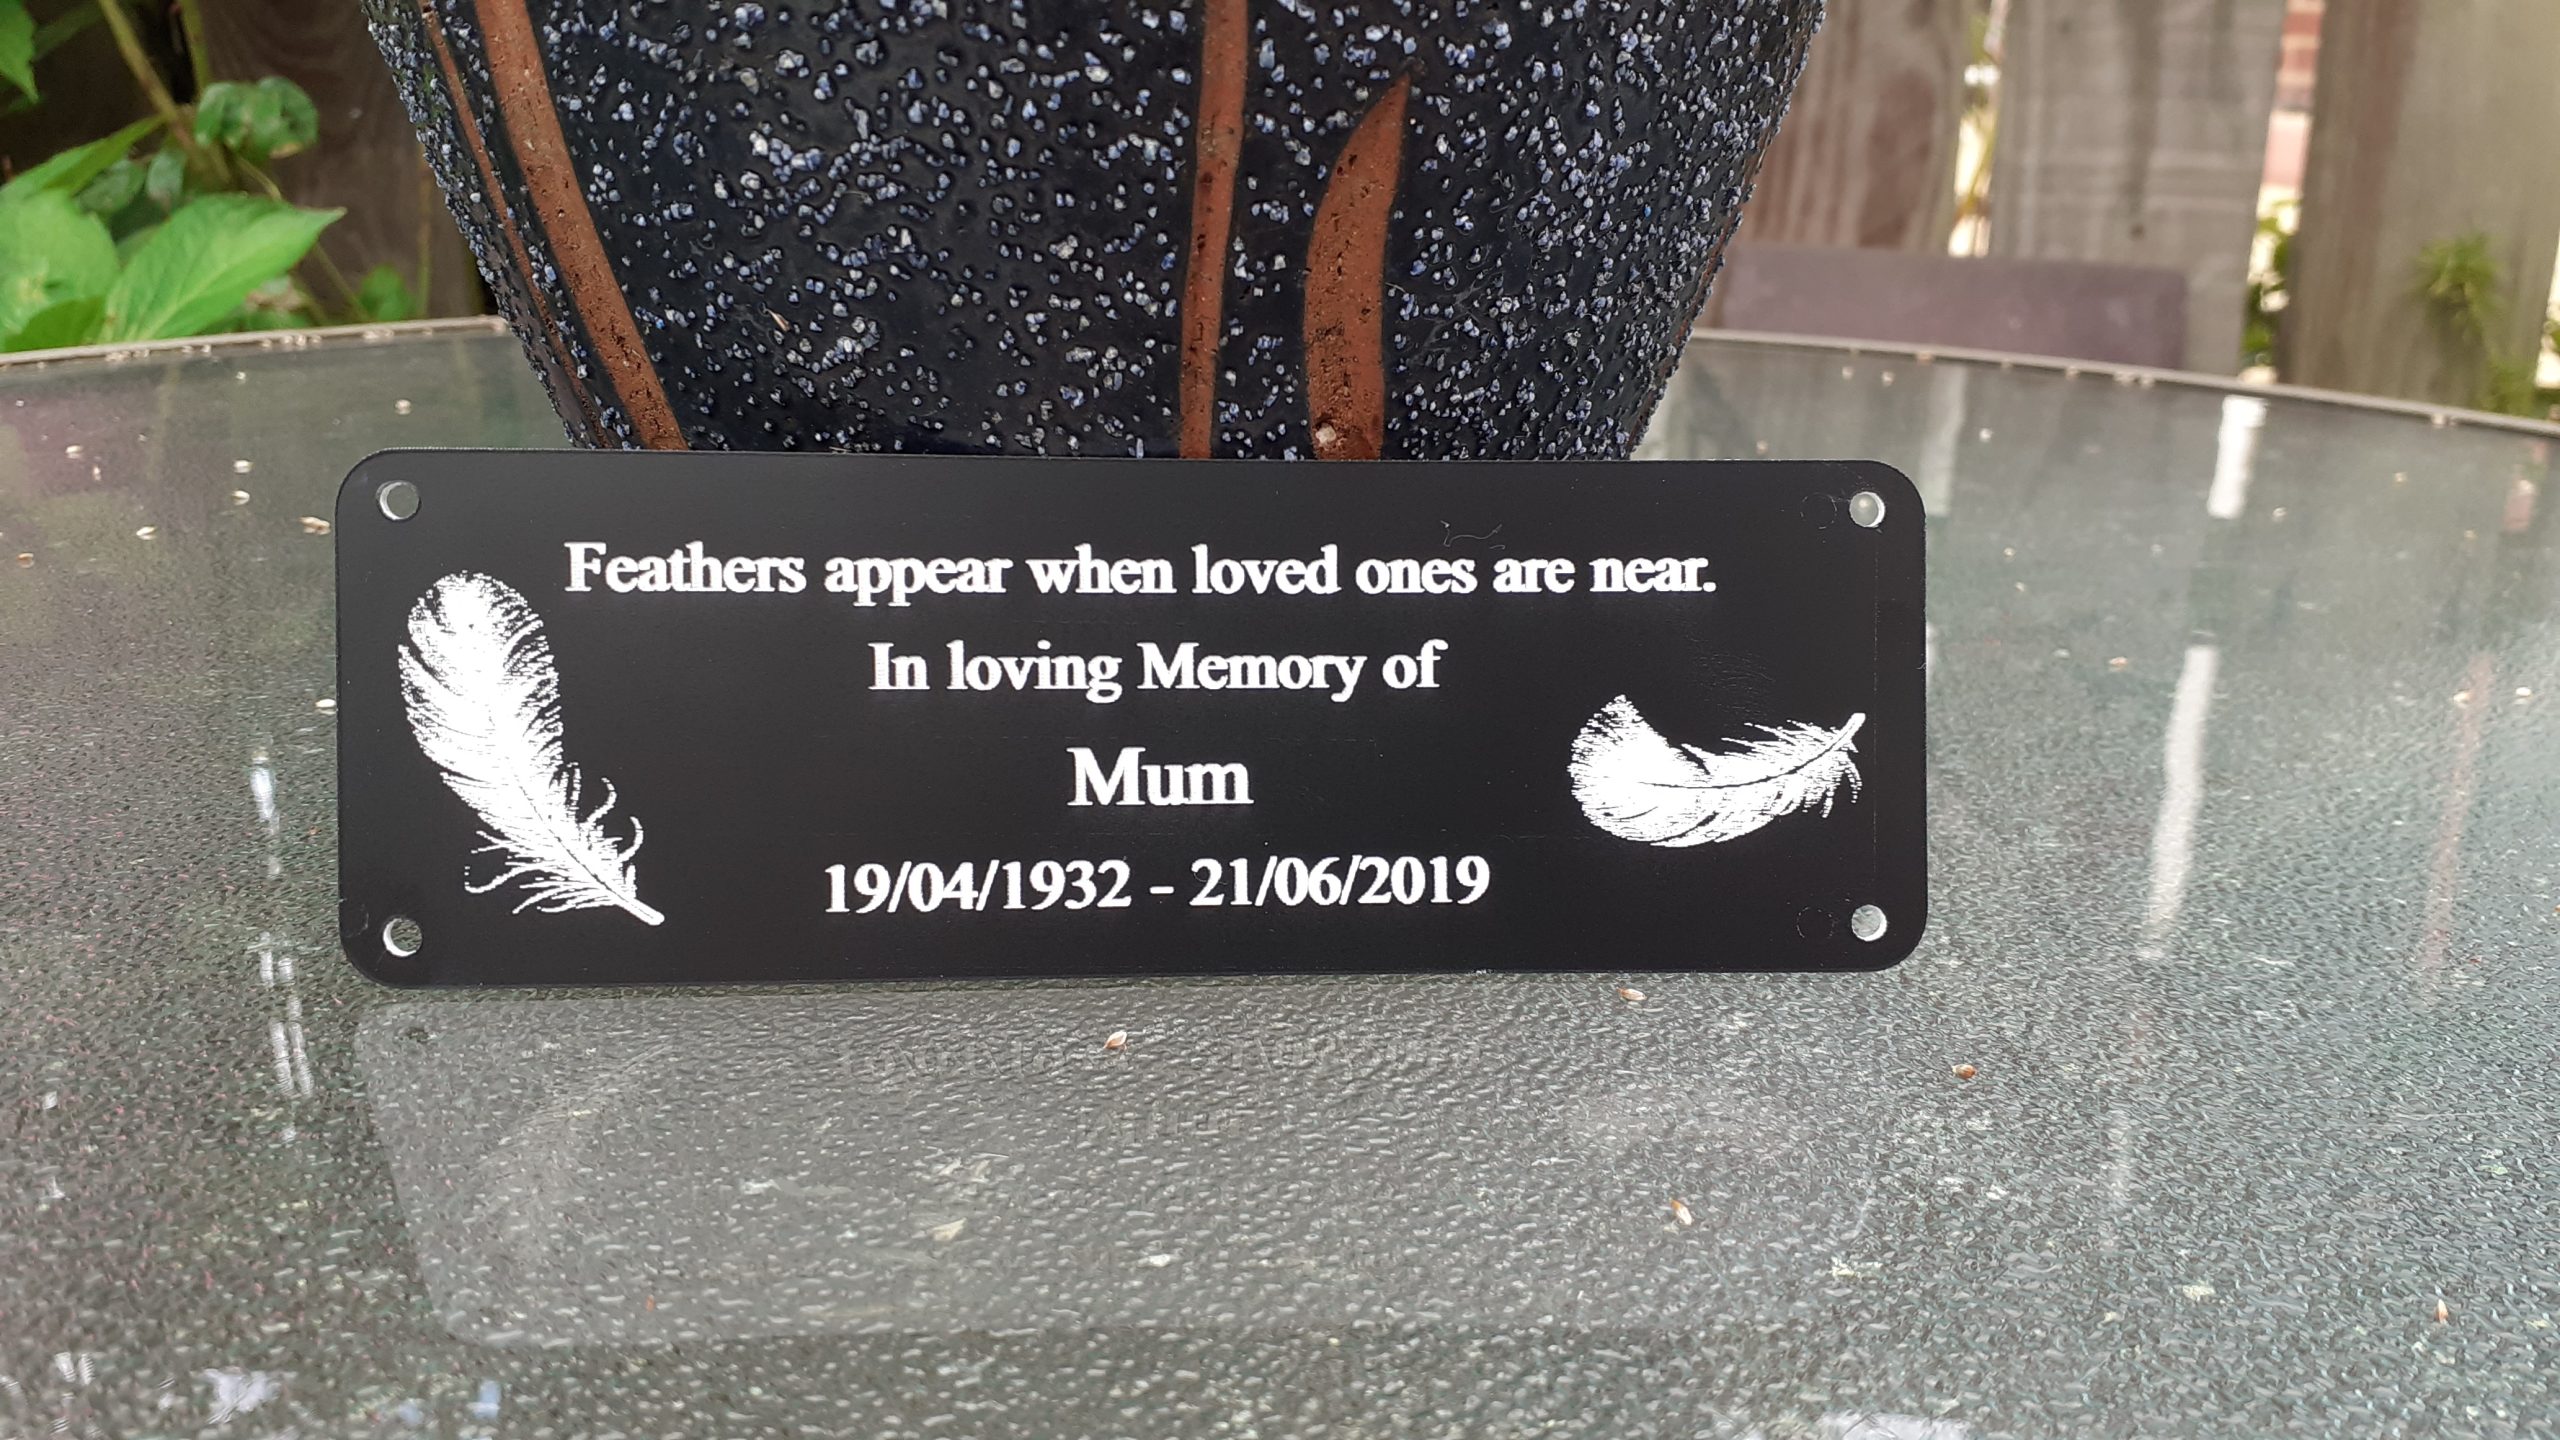 Personalised bench Plaques - 6" x 2" with decorative feathers either side of the white engraved text, 4 screw holes in each corner.